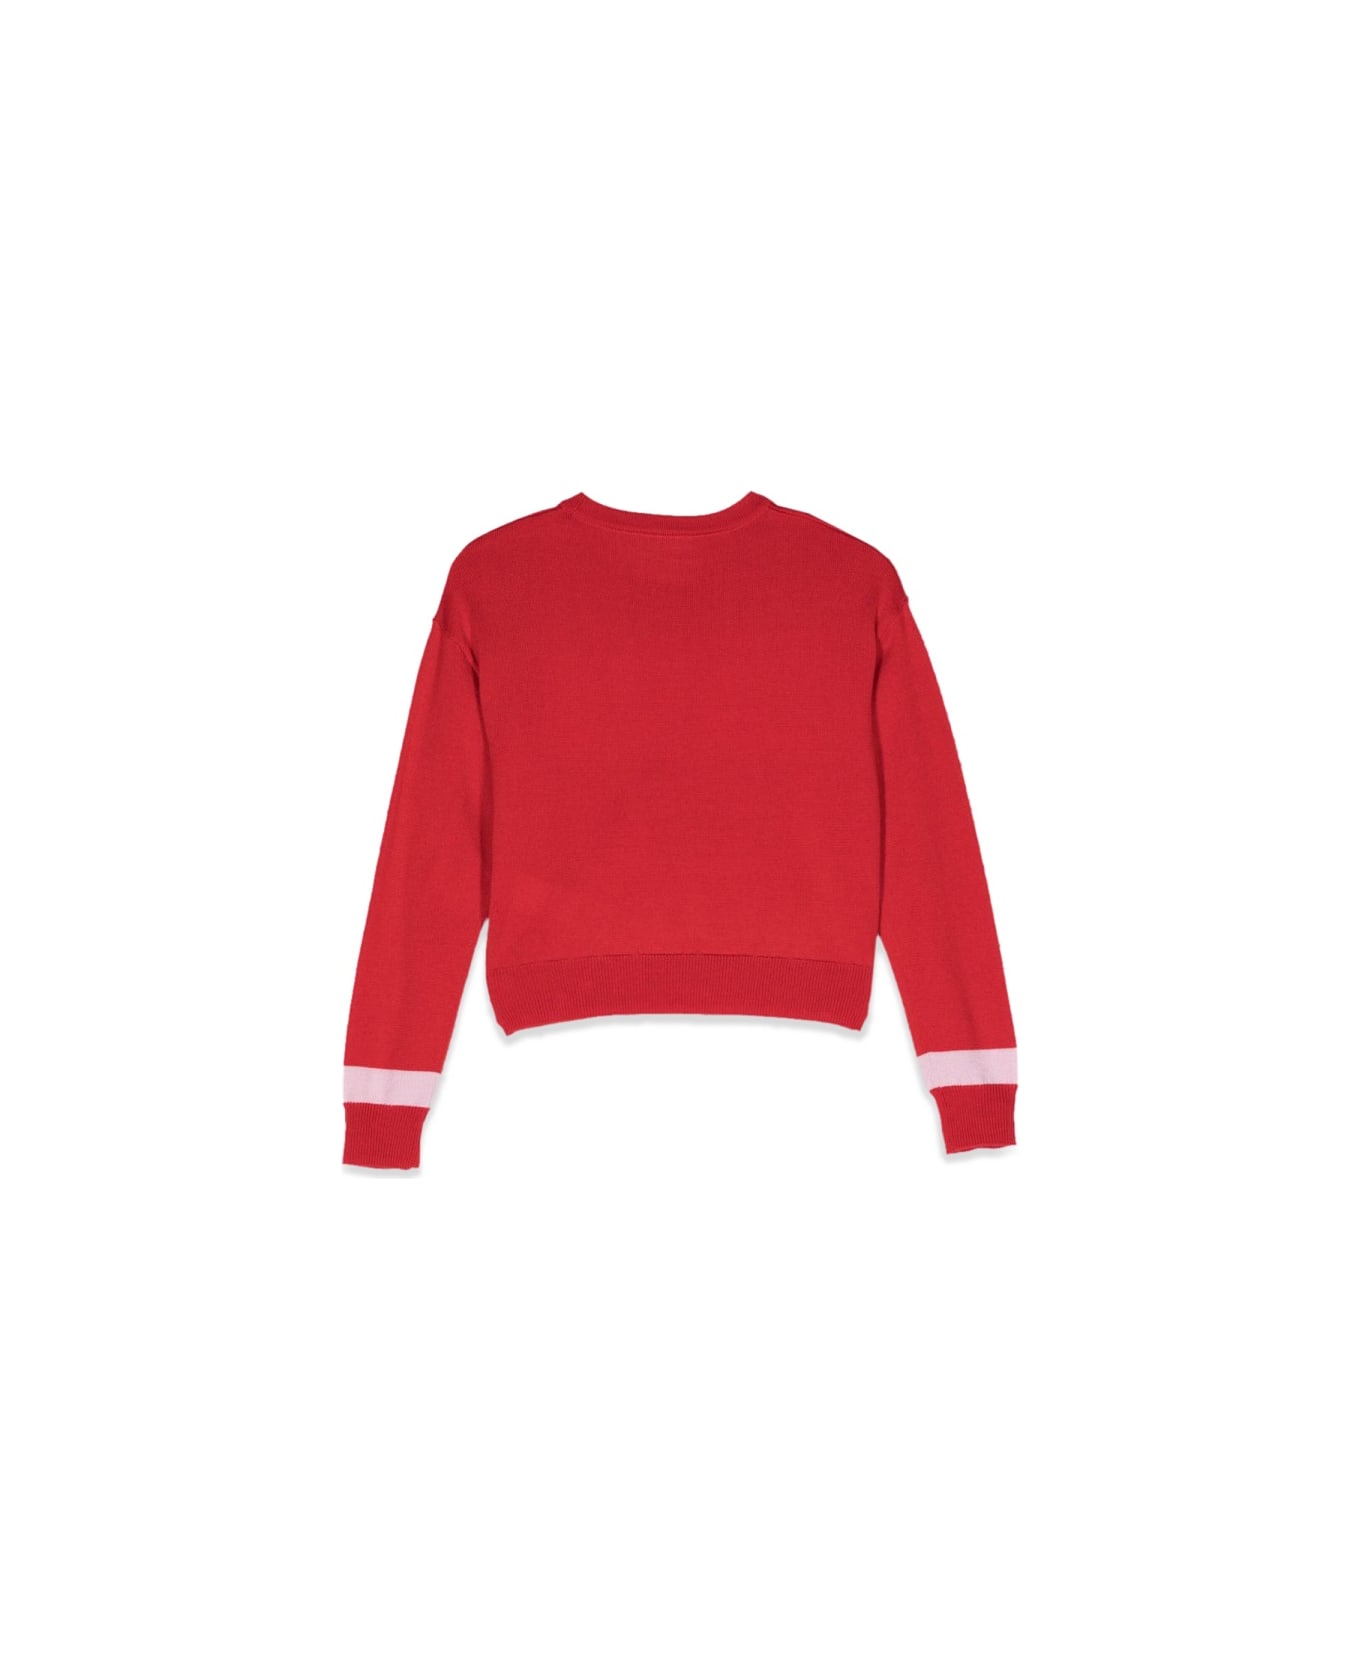 N.21 Logo Crew Neck Pullover - RED